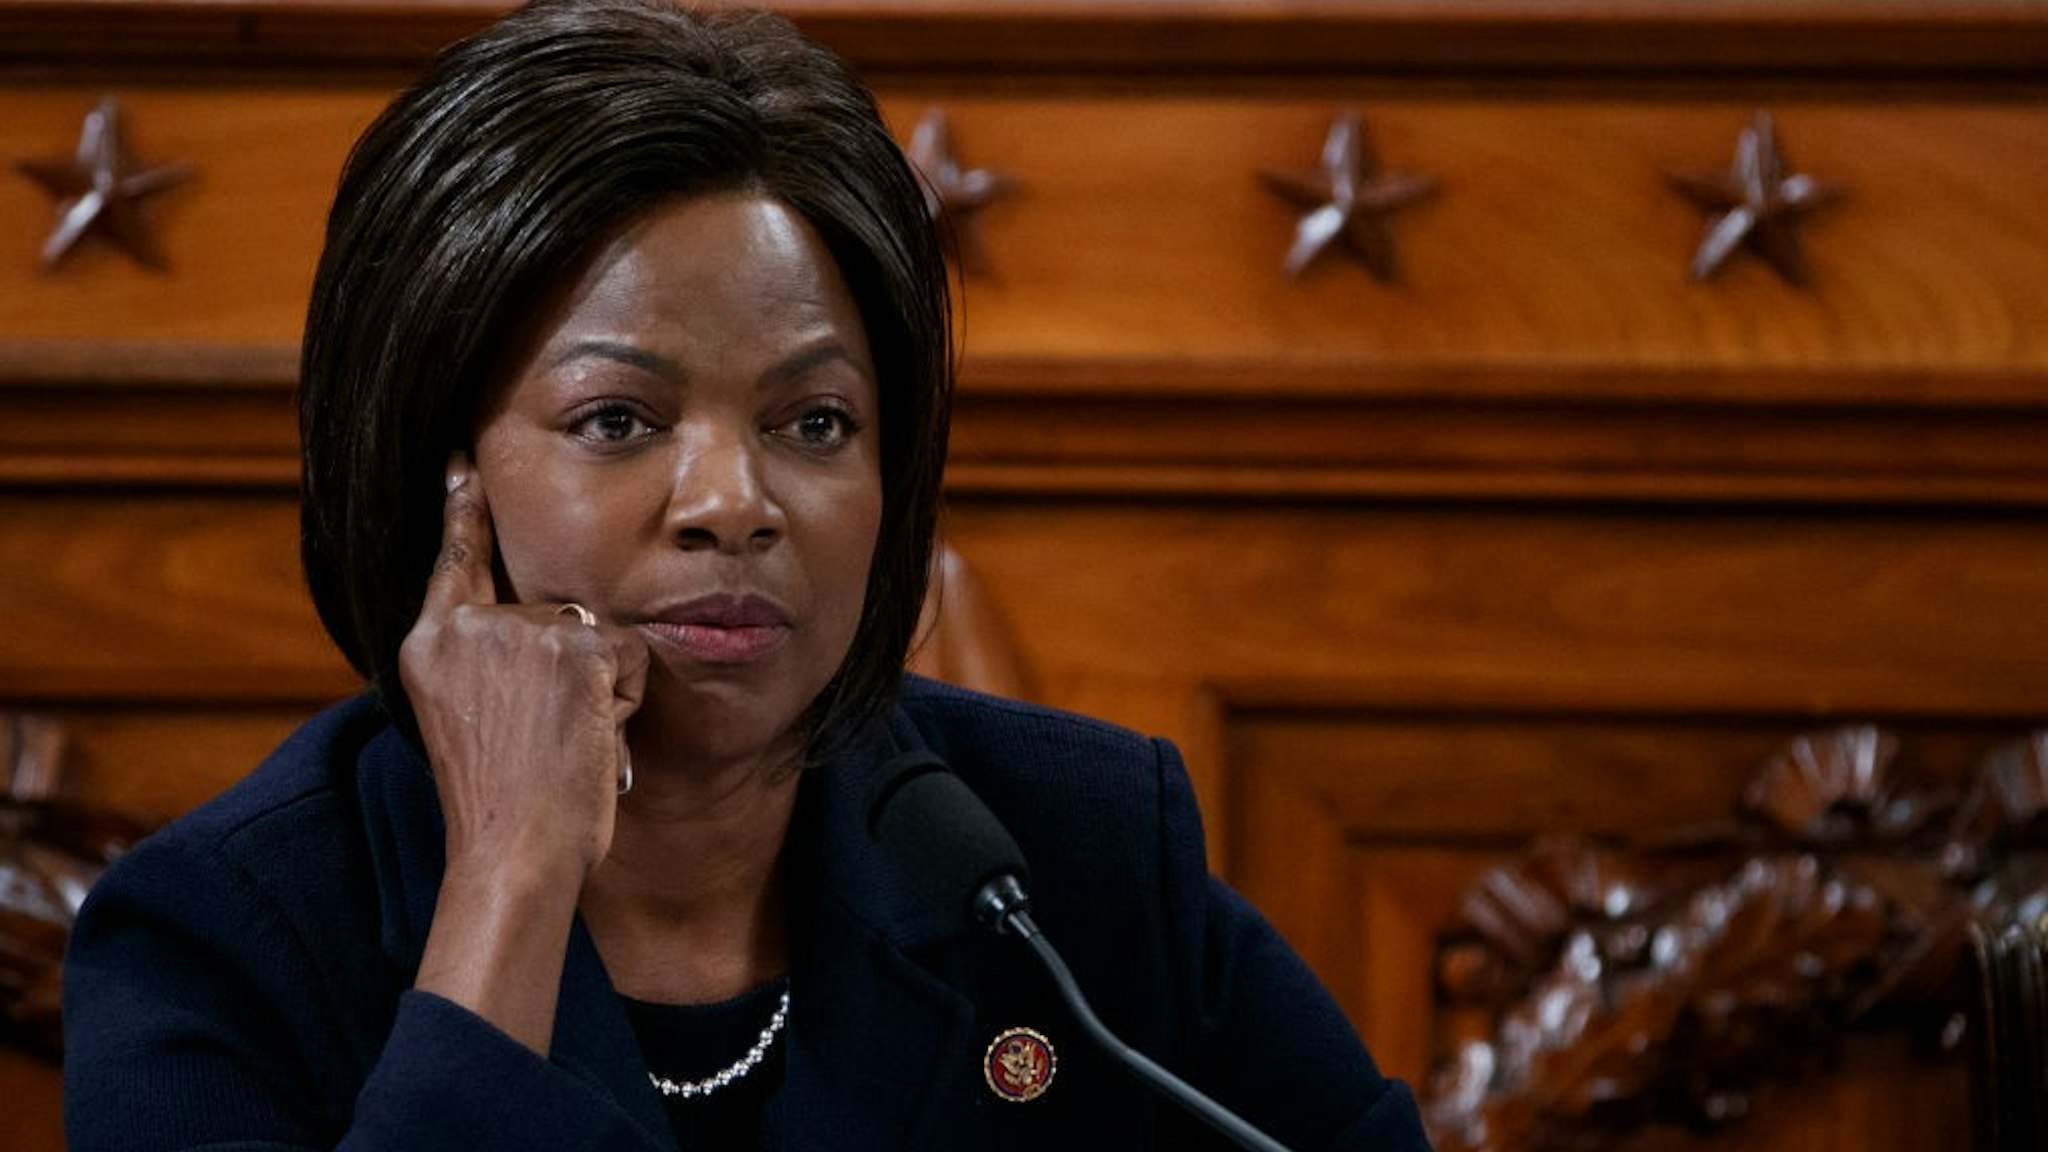 WASHINGTON, DC - NOVEMBER 19: Rep. Val Demings (D-FL) questions former State Department special envoy to Ukraine Kurt Volker and former National Security Council Senior Director for European and Russian Affairs Tim Morrison during testimony before the House Intelligence Committee in the Longworth House Office Building on Capitol Hill November 19, 2019 in Washington, DC. The committee heard testimony during the third day of open hearings in the impeachment inquiry against U.S. President Donald Trump, whom House Democrats say held back U.S. military aid for Ukraine while demanding it investigate his political rivals. (Photo by